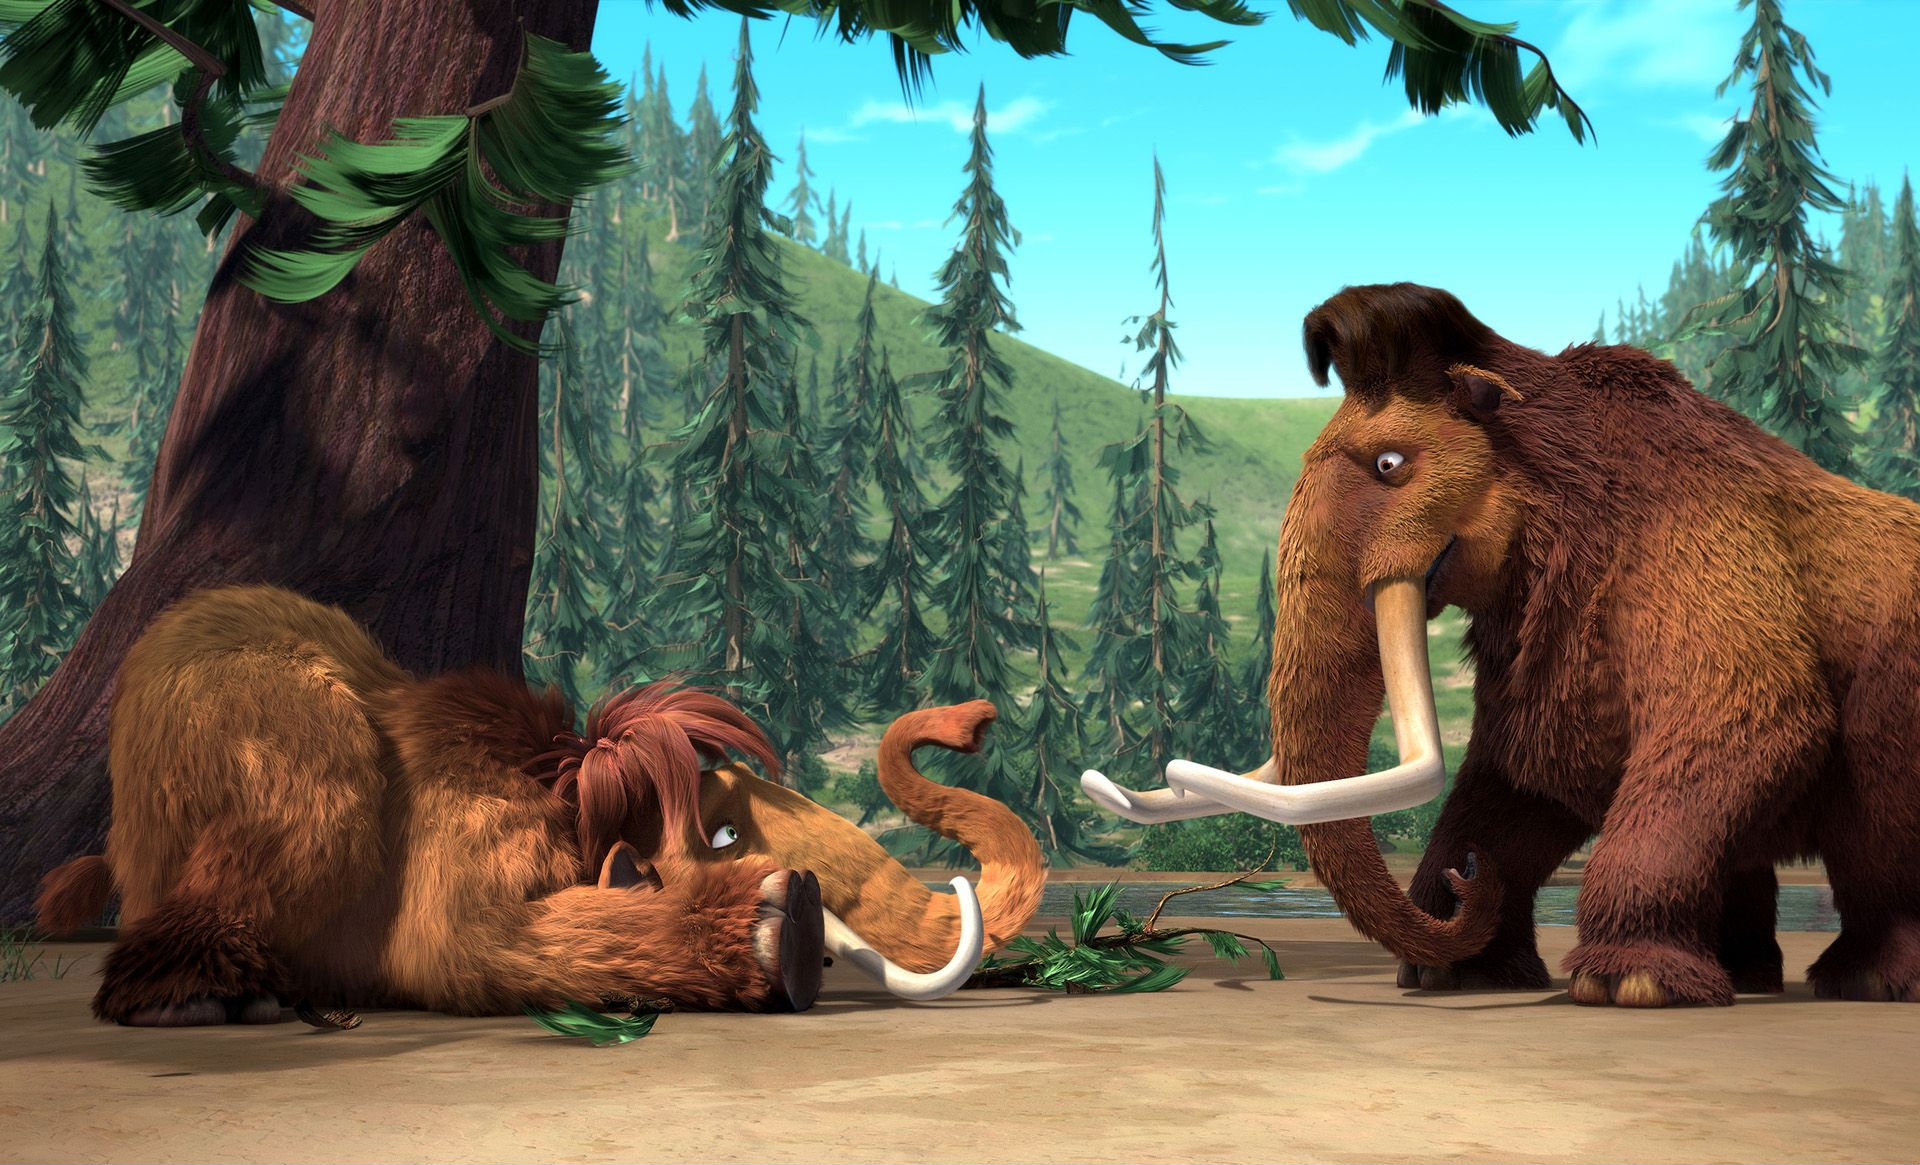 Movie Ice Age: The Meltdown HD Wallpaper | Background Image